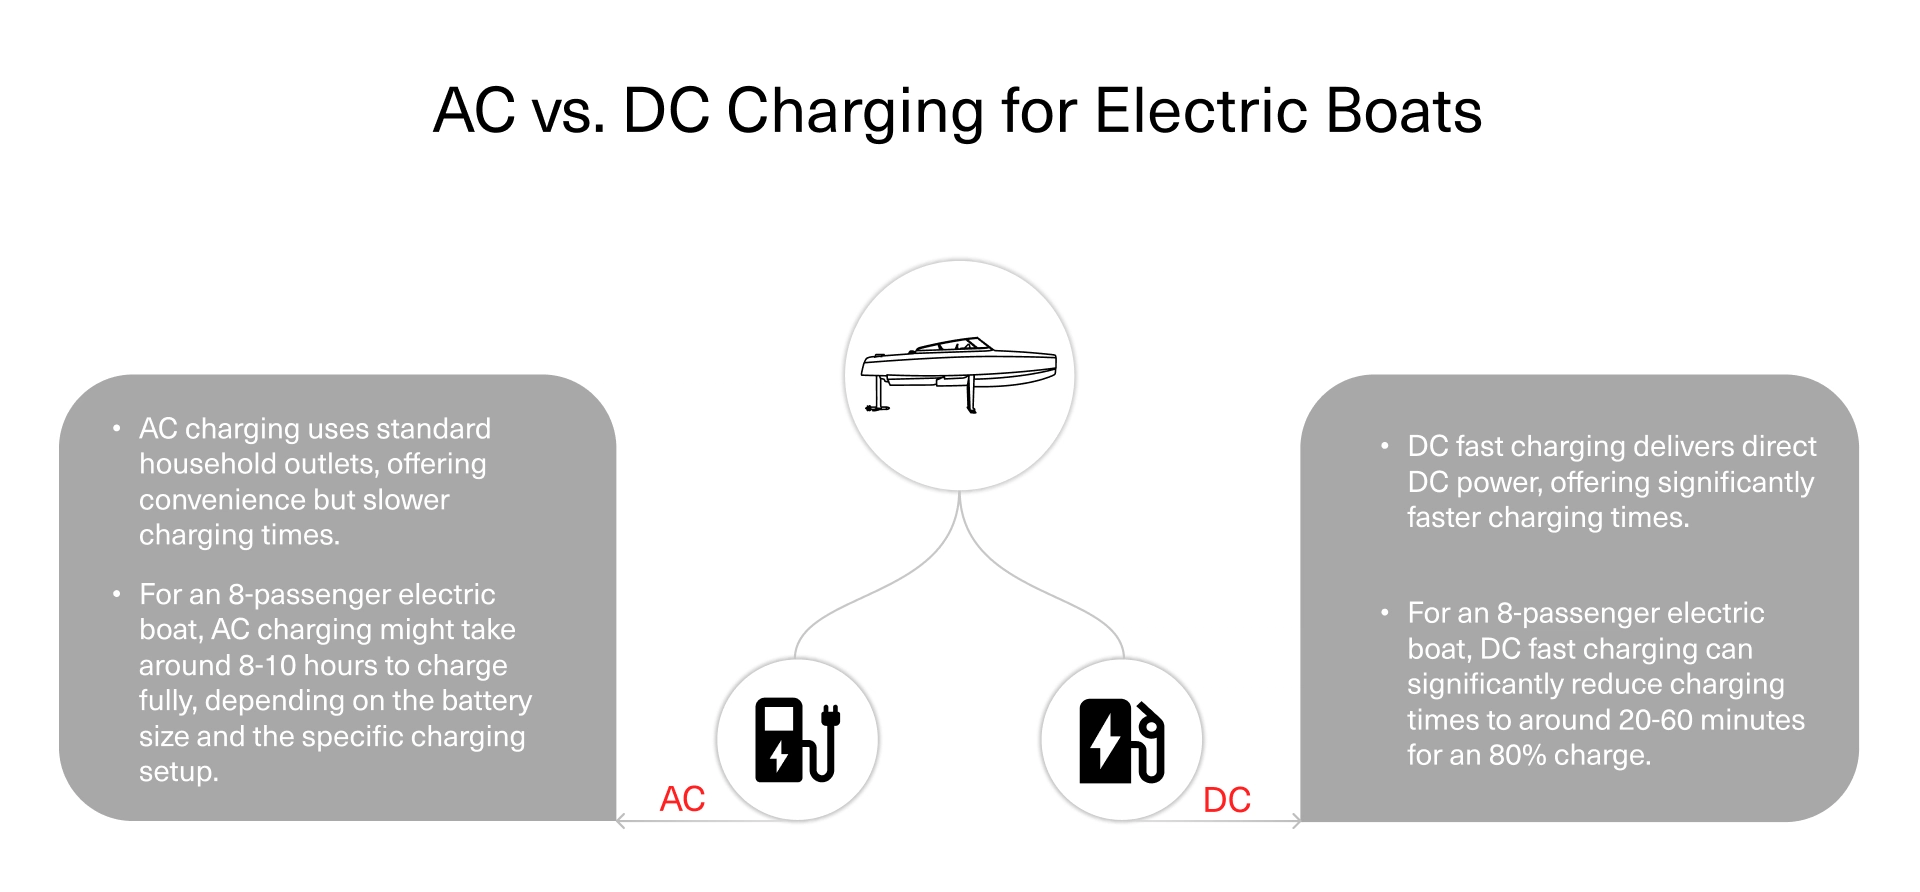 AC vs. DC Charging for Electric Boats